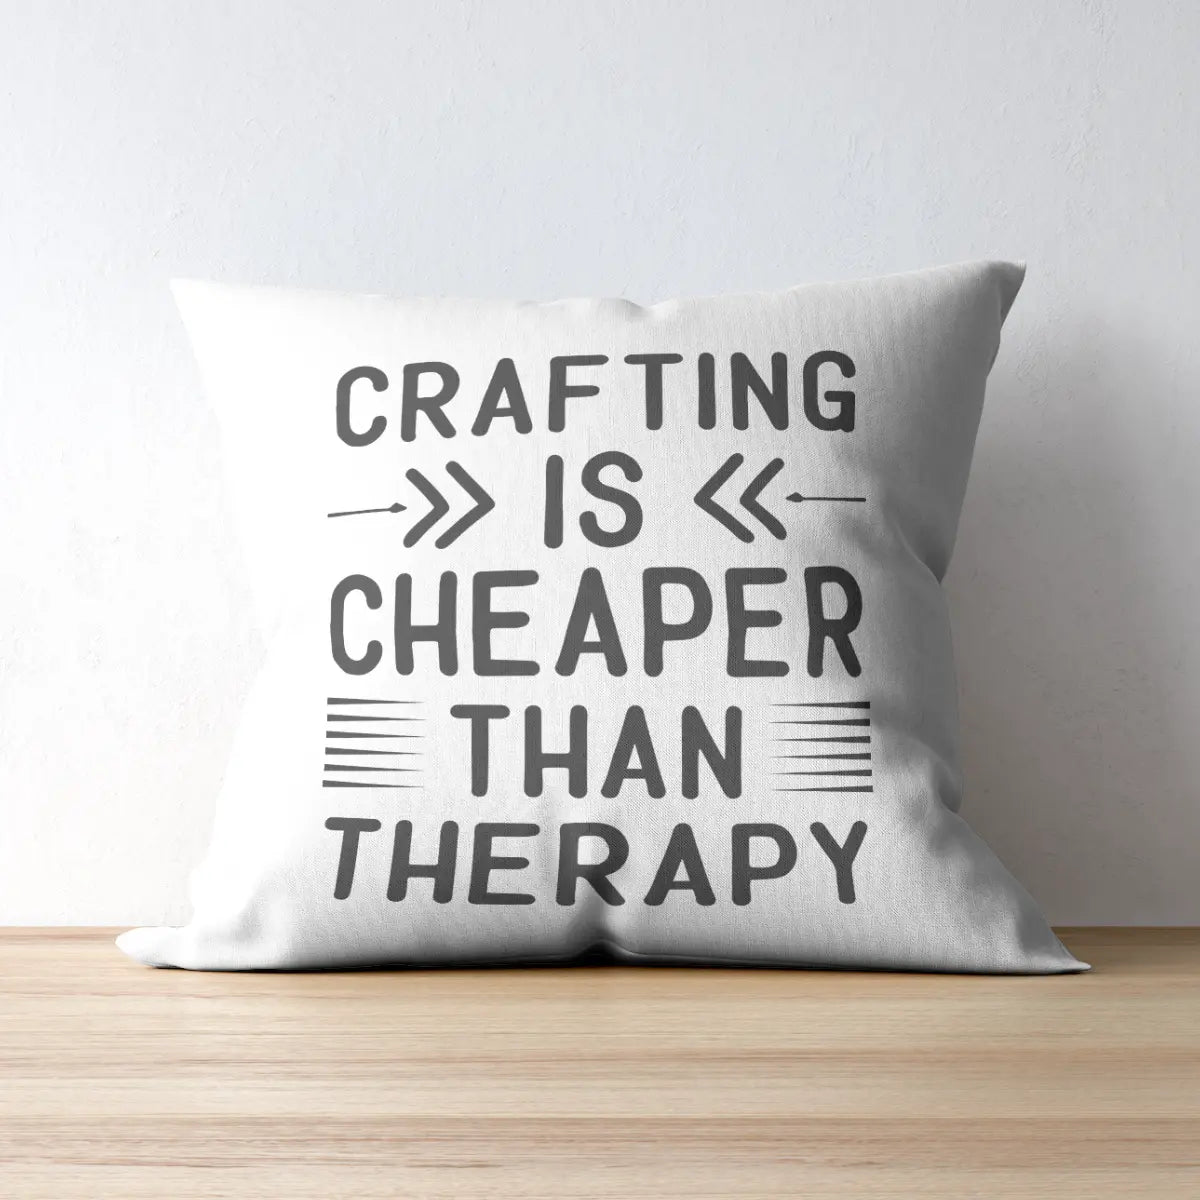 Crafting is cheaper than therapy SVG | Digital Download | Cut File | SVG Only The Sweet Stuff